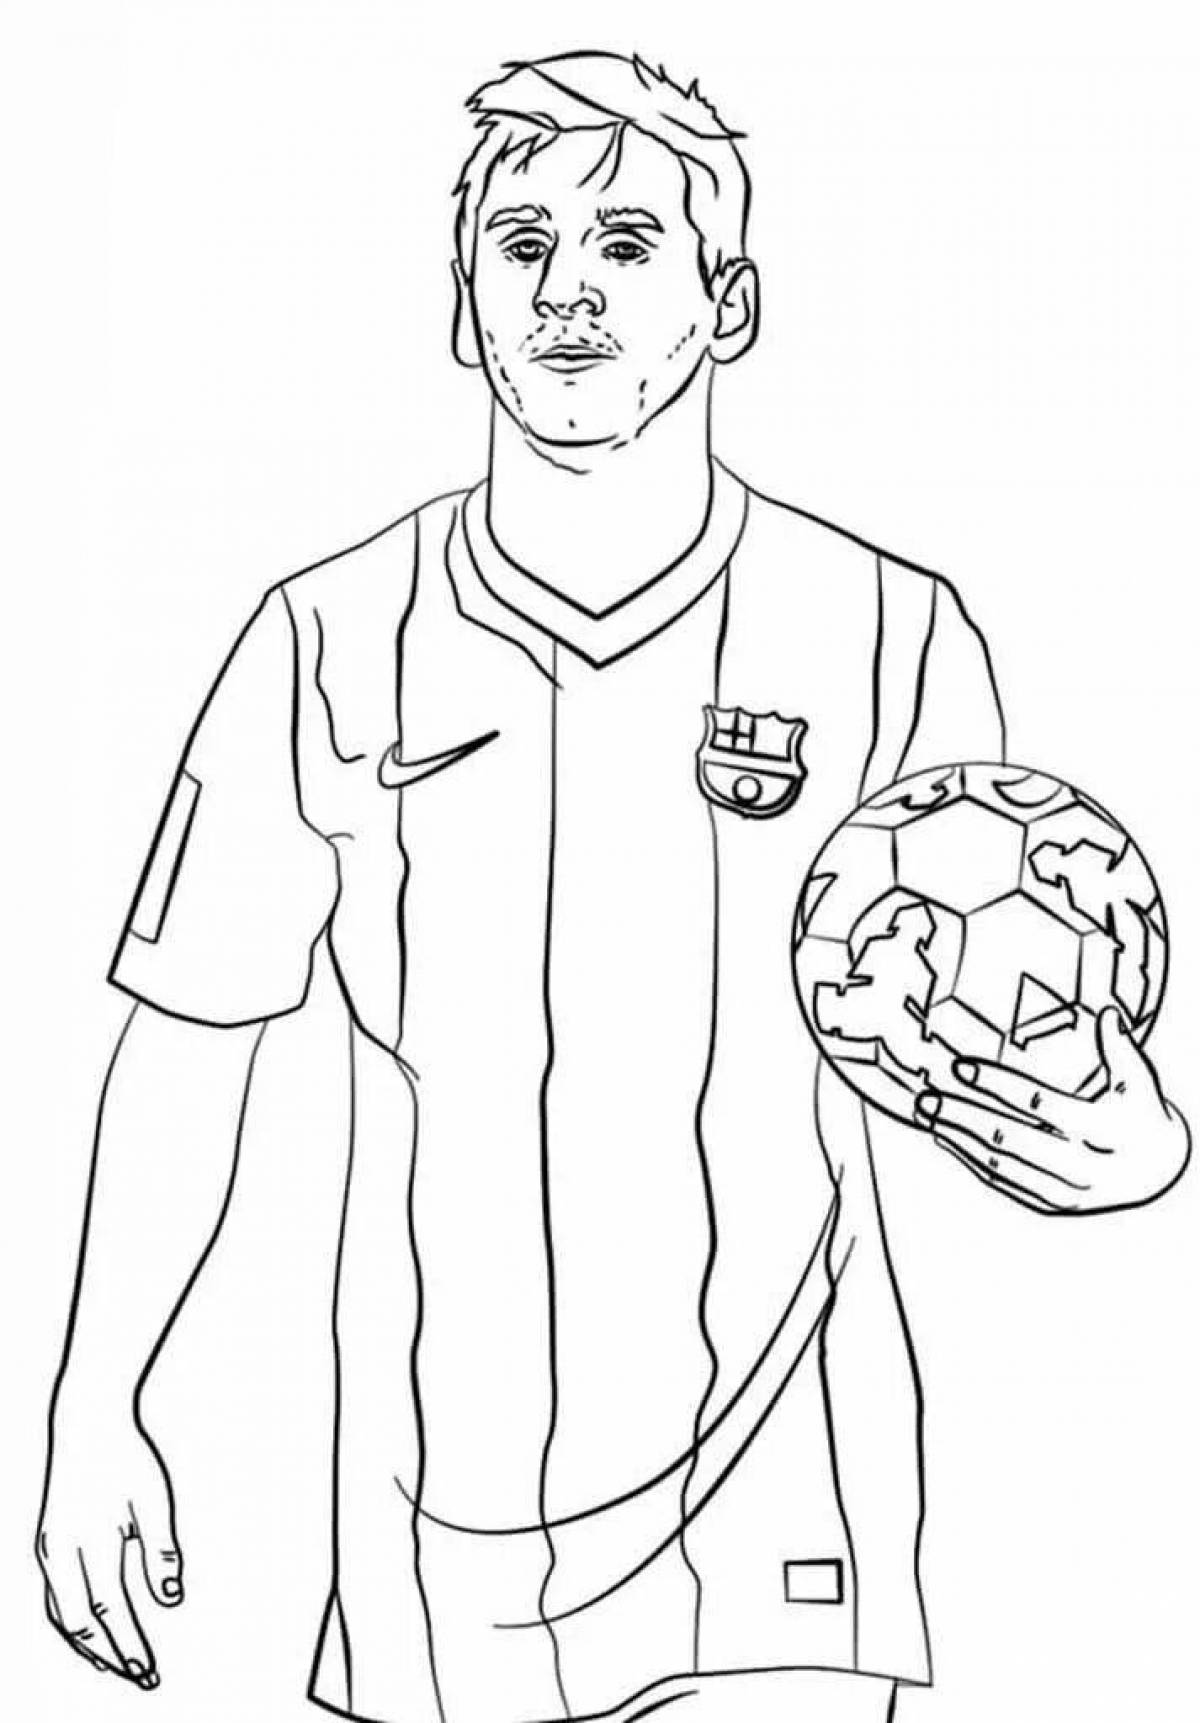 Dynamic football coloring book for boys